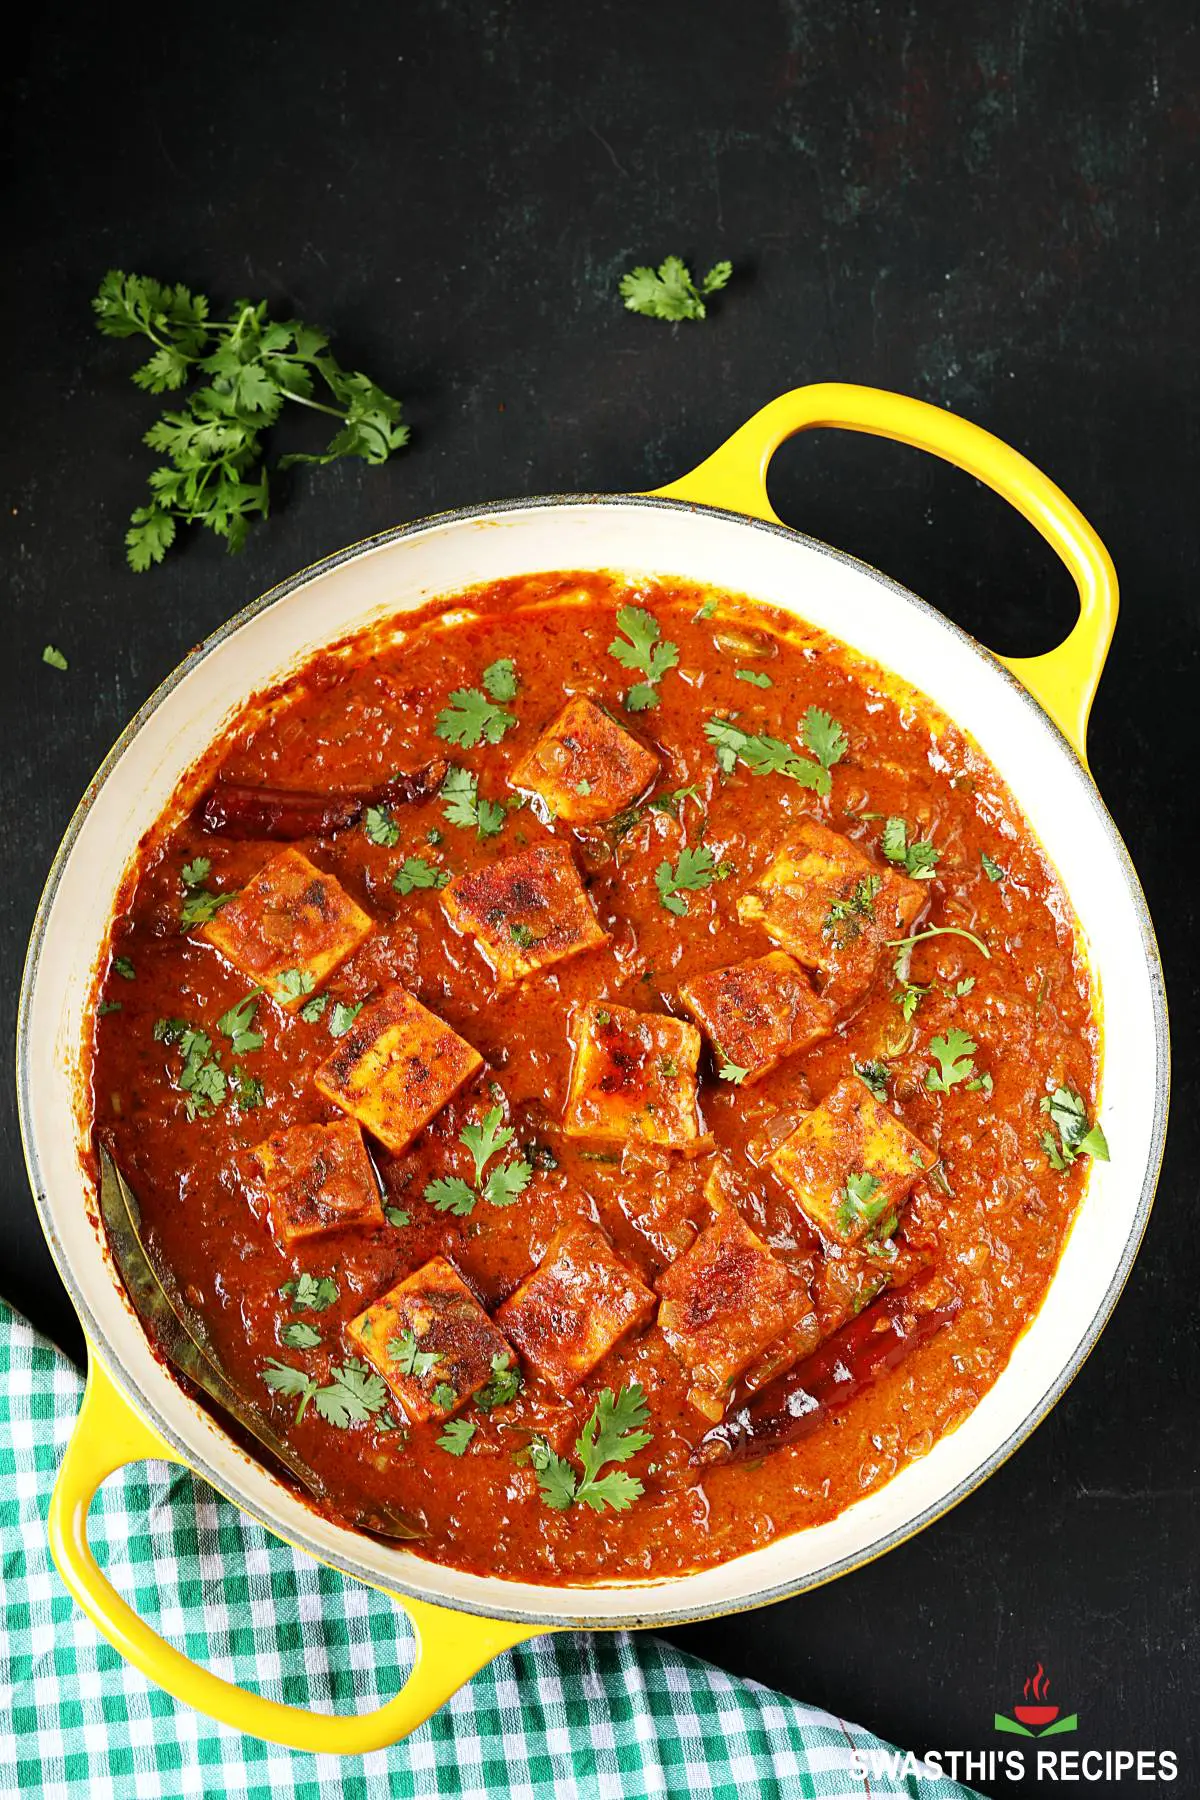 Paneer Curry Recipe (Dhaba Style) - Swasthi's Recipes